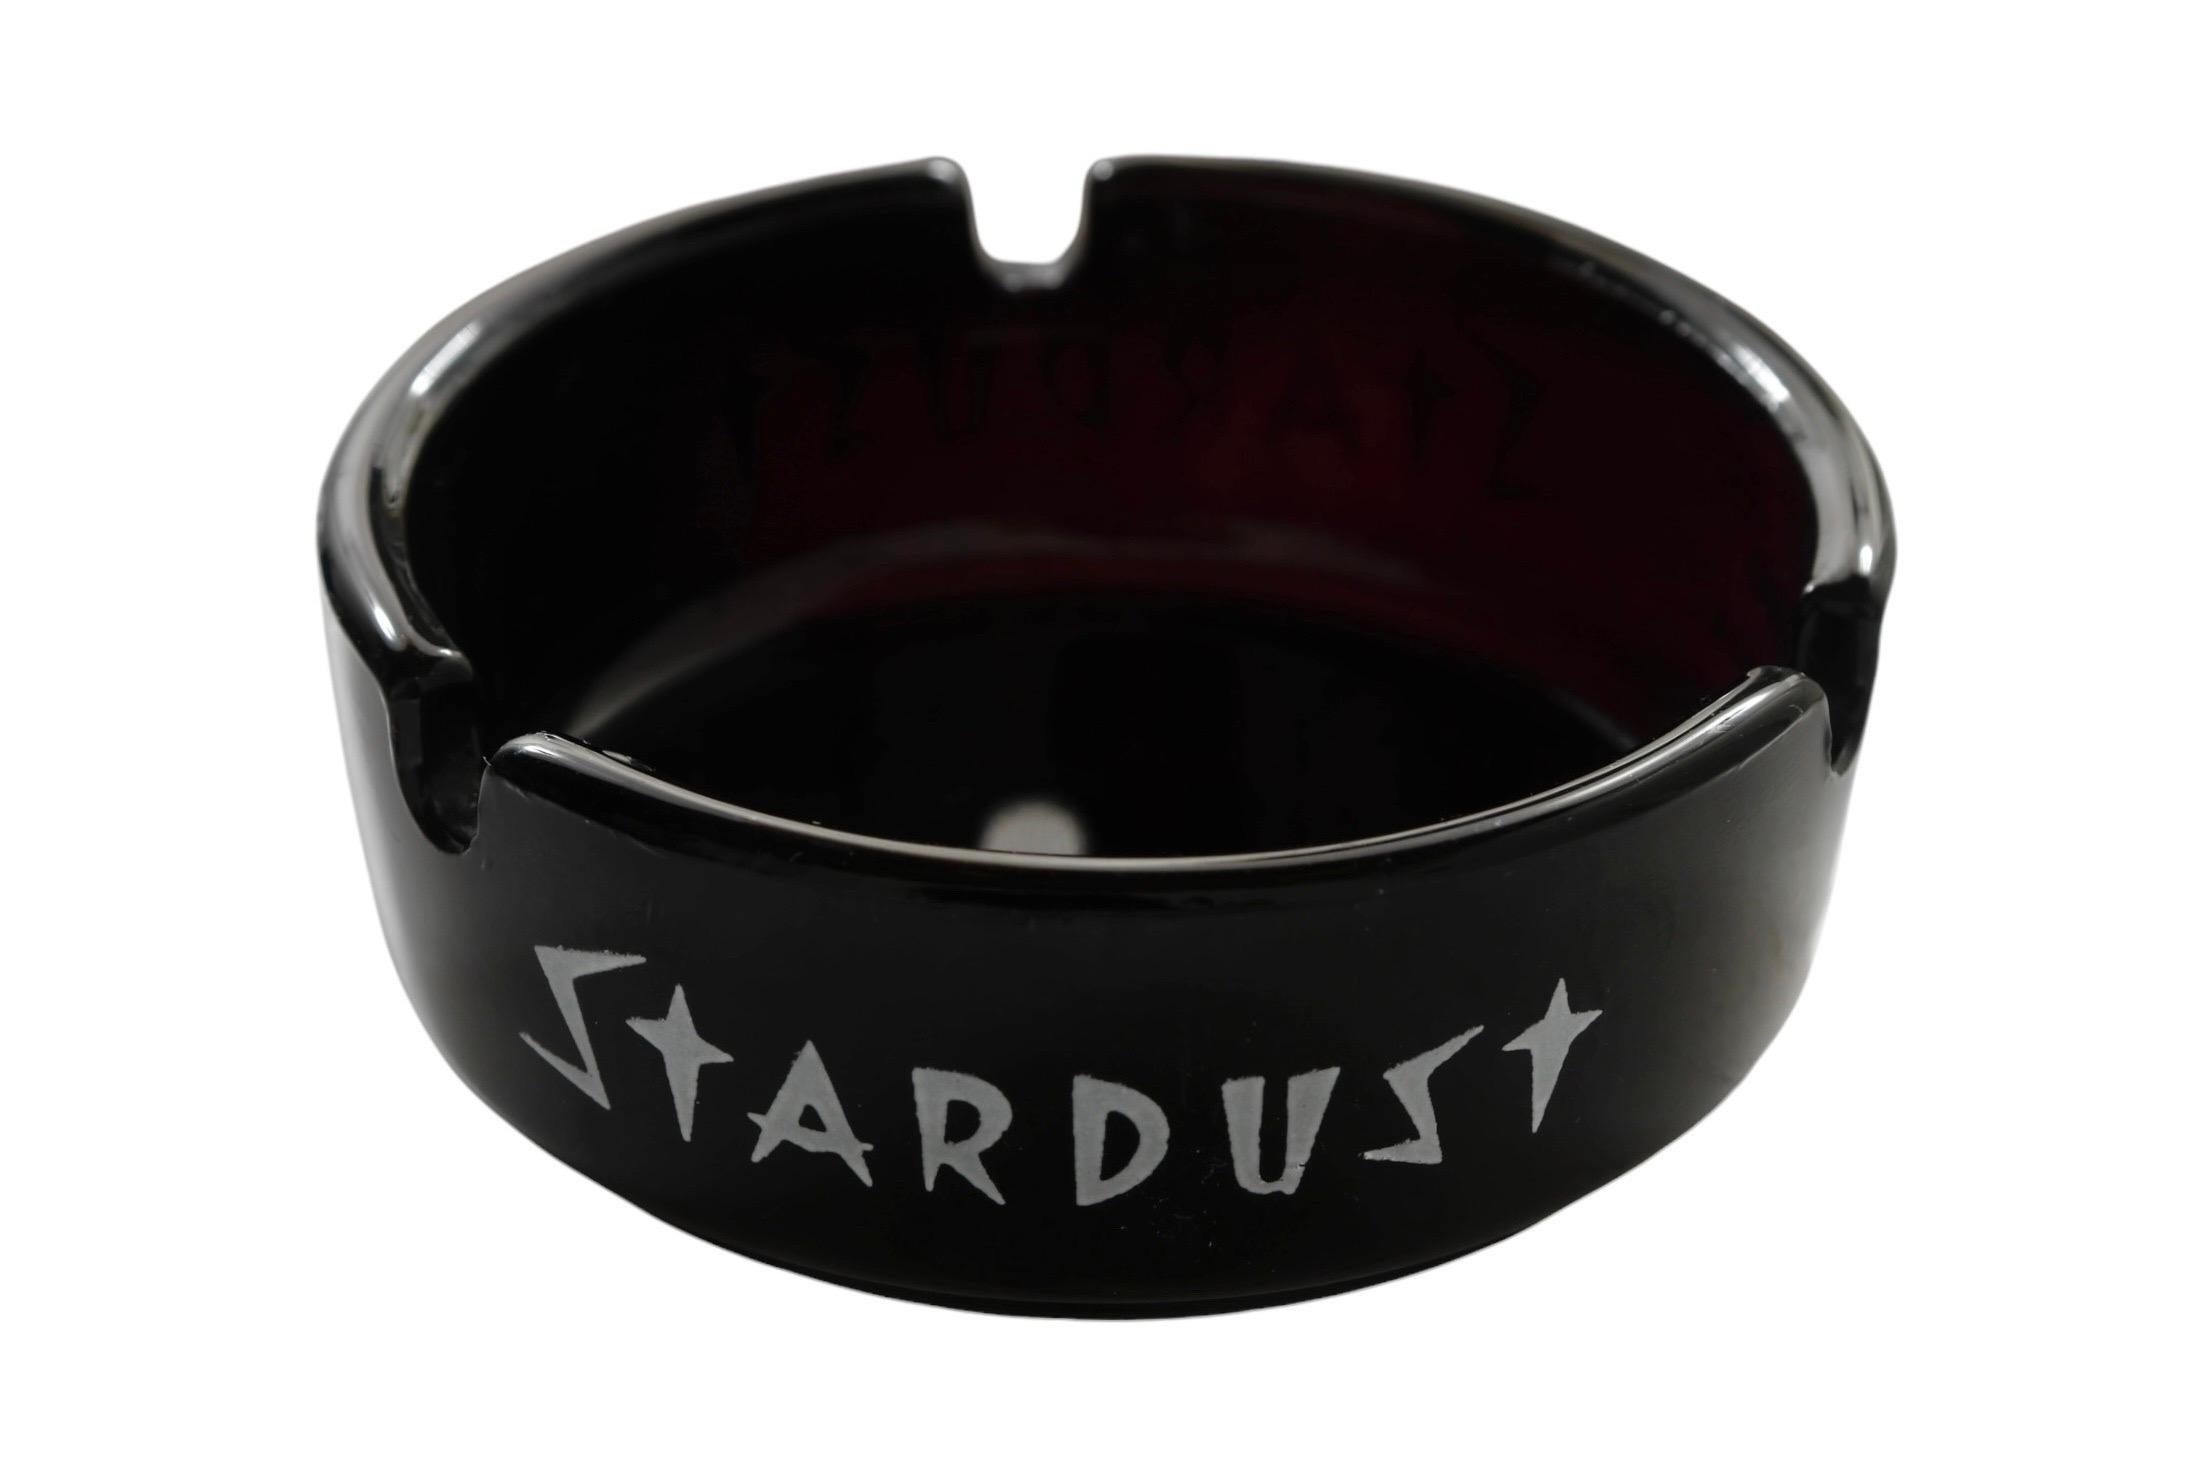 A black glass ashtray from the Stardust Hotel & Casino in Las Vegas, Nevada. Printed around the edge in white with the Stardust logo.

